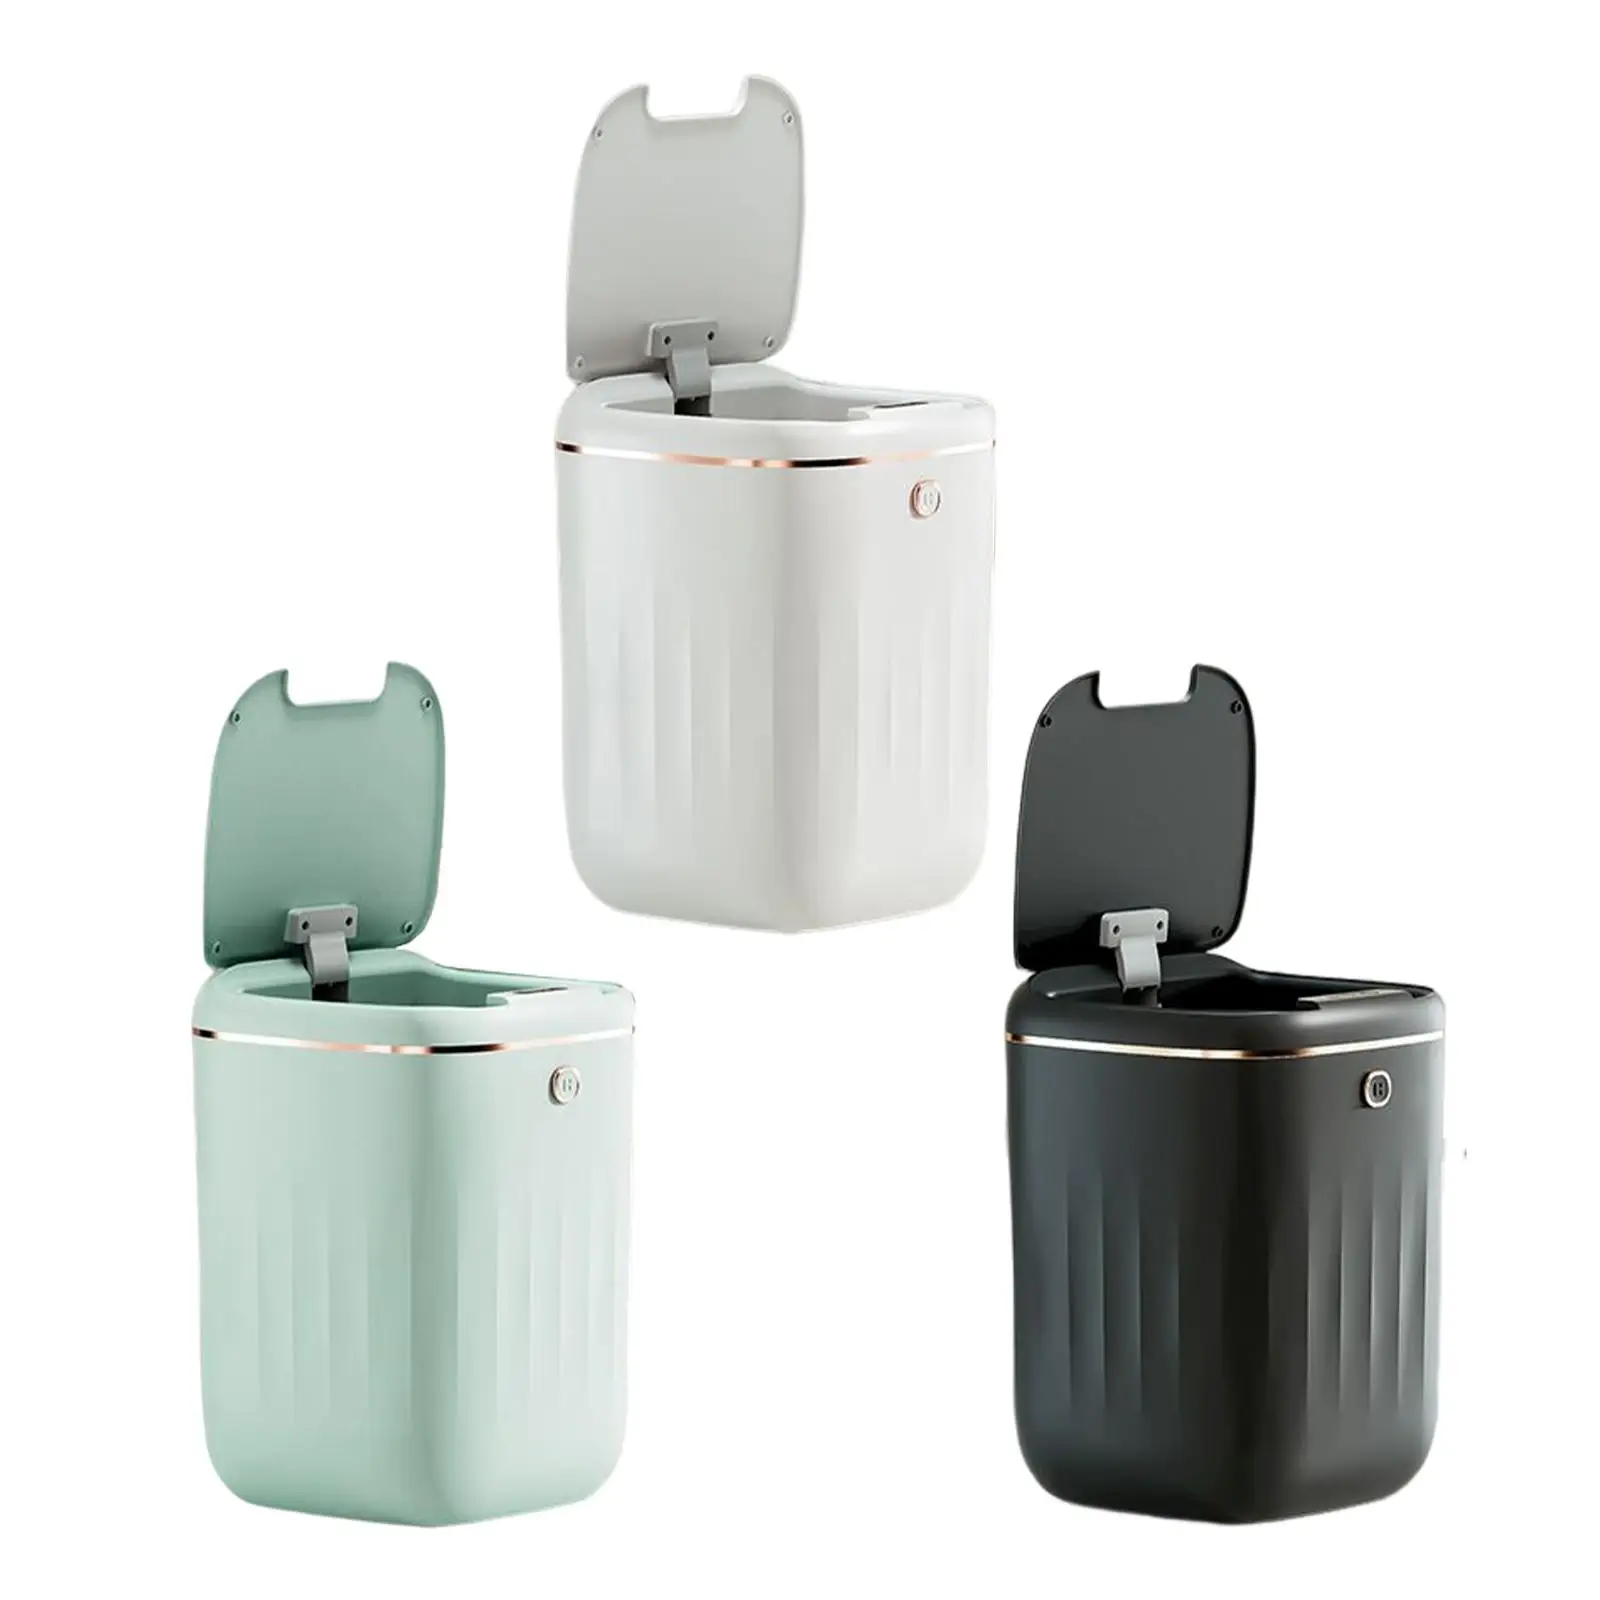 Induction Trash Bin 20L 3 Modes Automatic Large Capacity with Lid Waste Bin Dustbin for Playroom Hotel Bathroom Study Dormitory